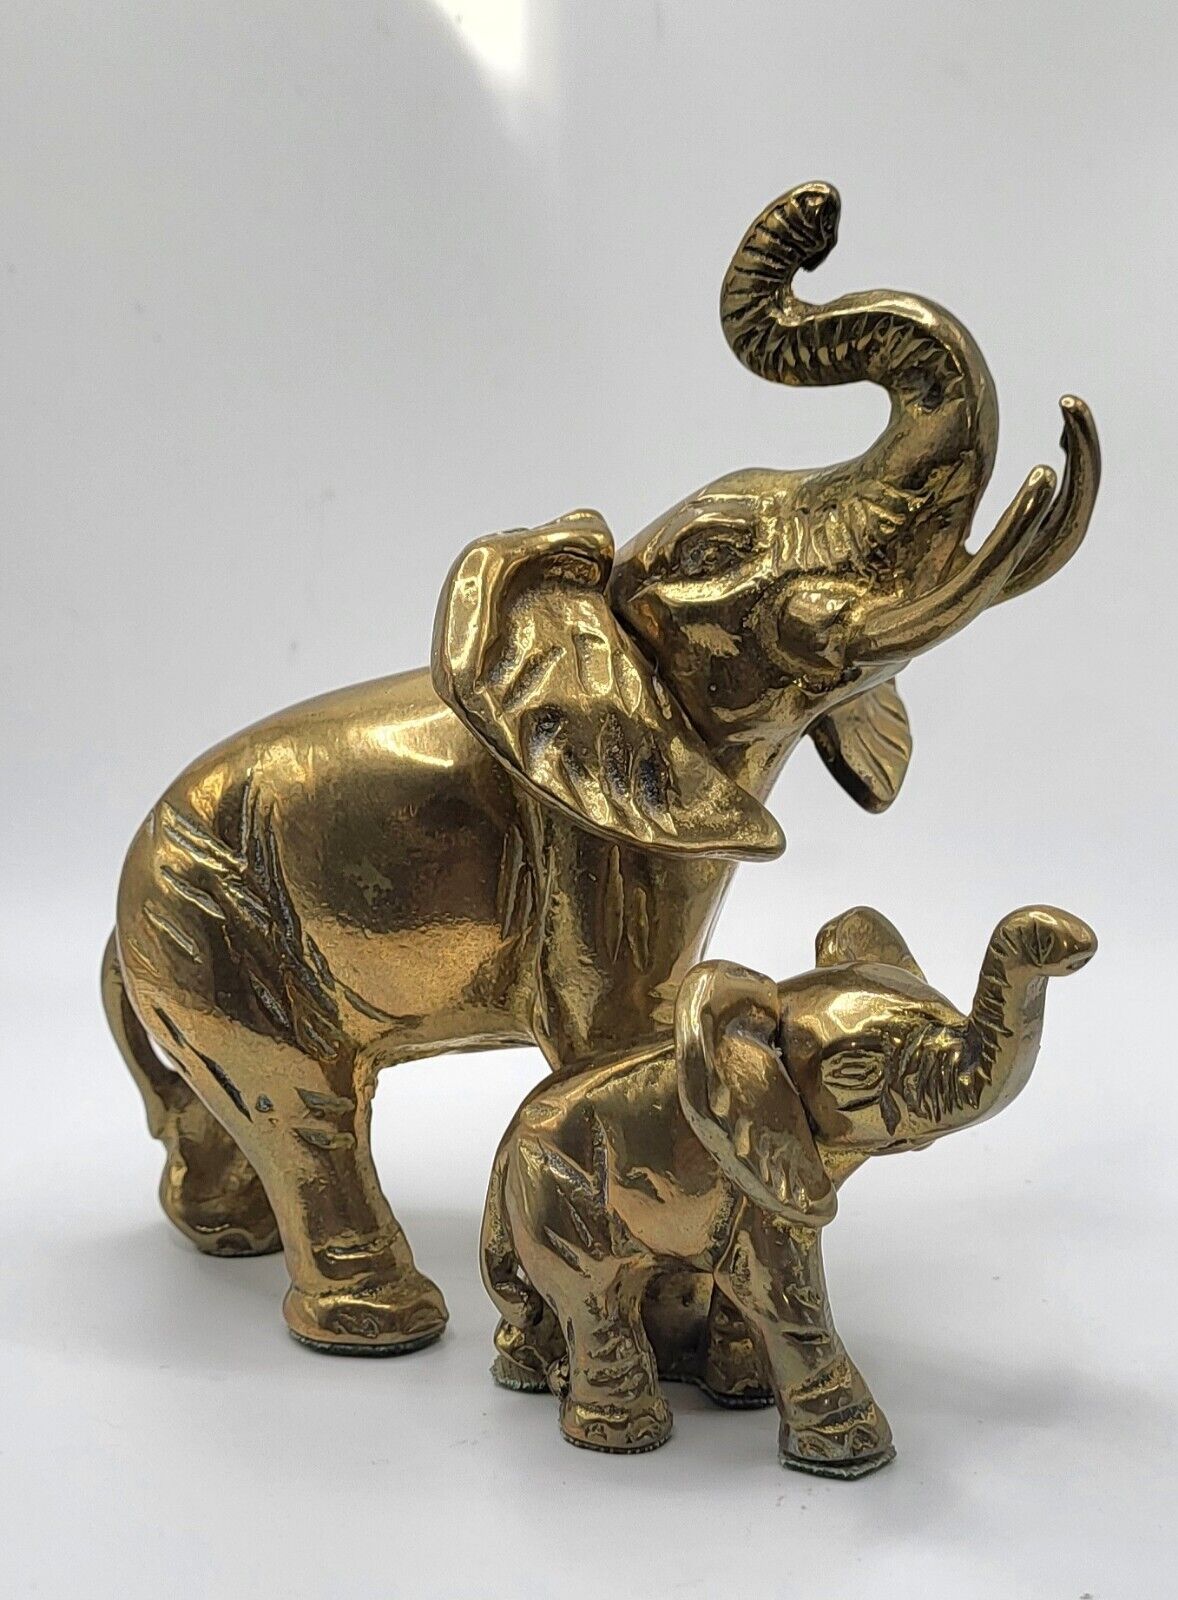 Vintage Solid Brass Elephants Mother and Baby Figurine Heavy Animal Trunk Up